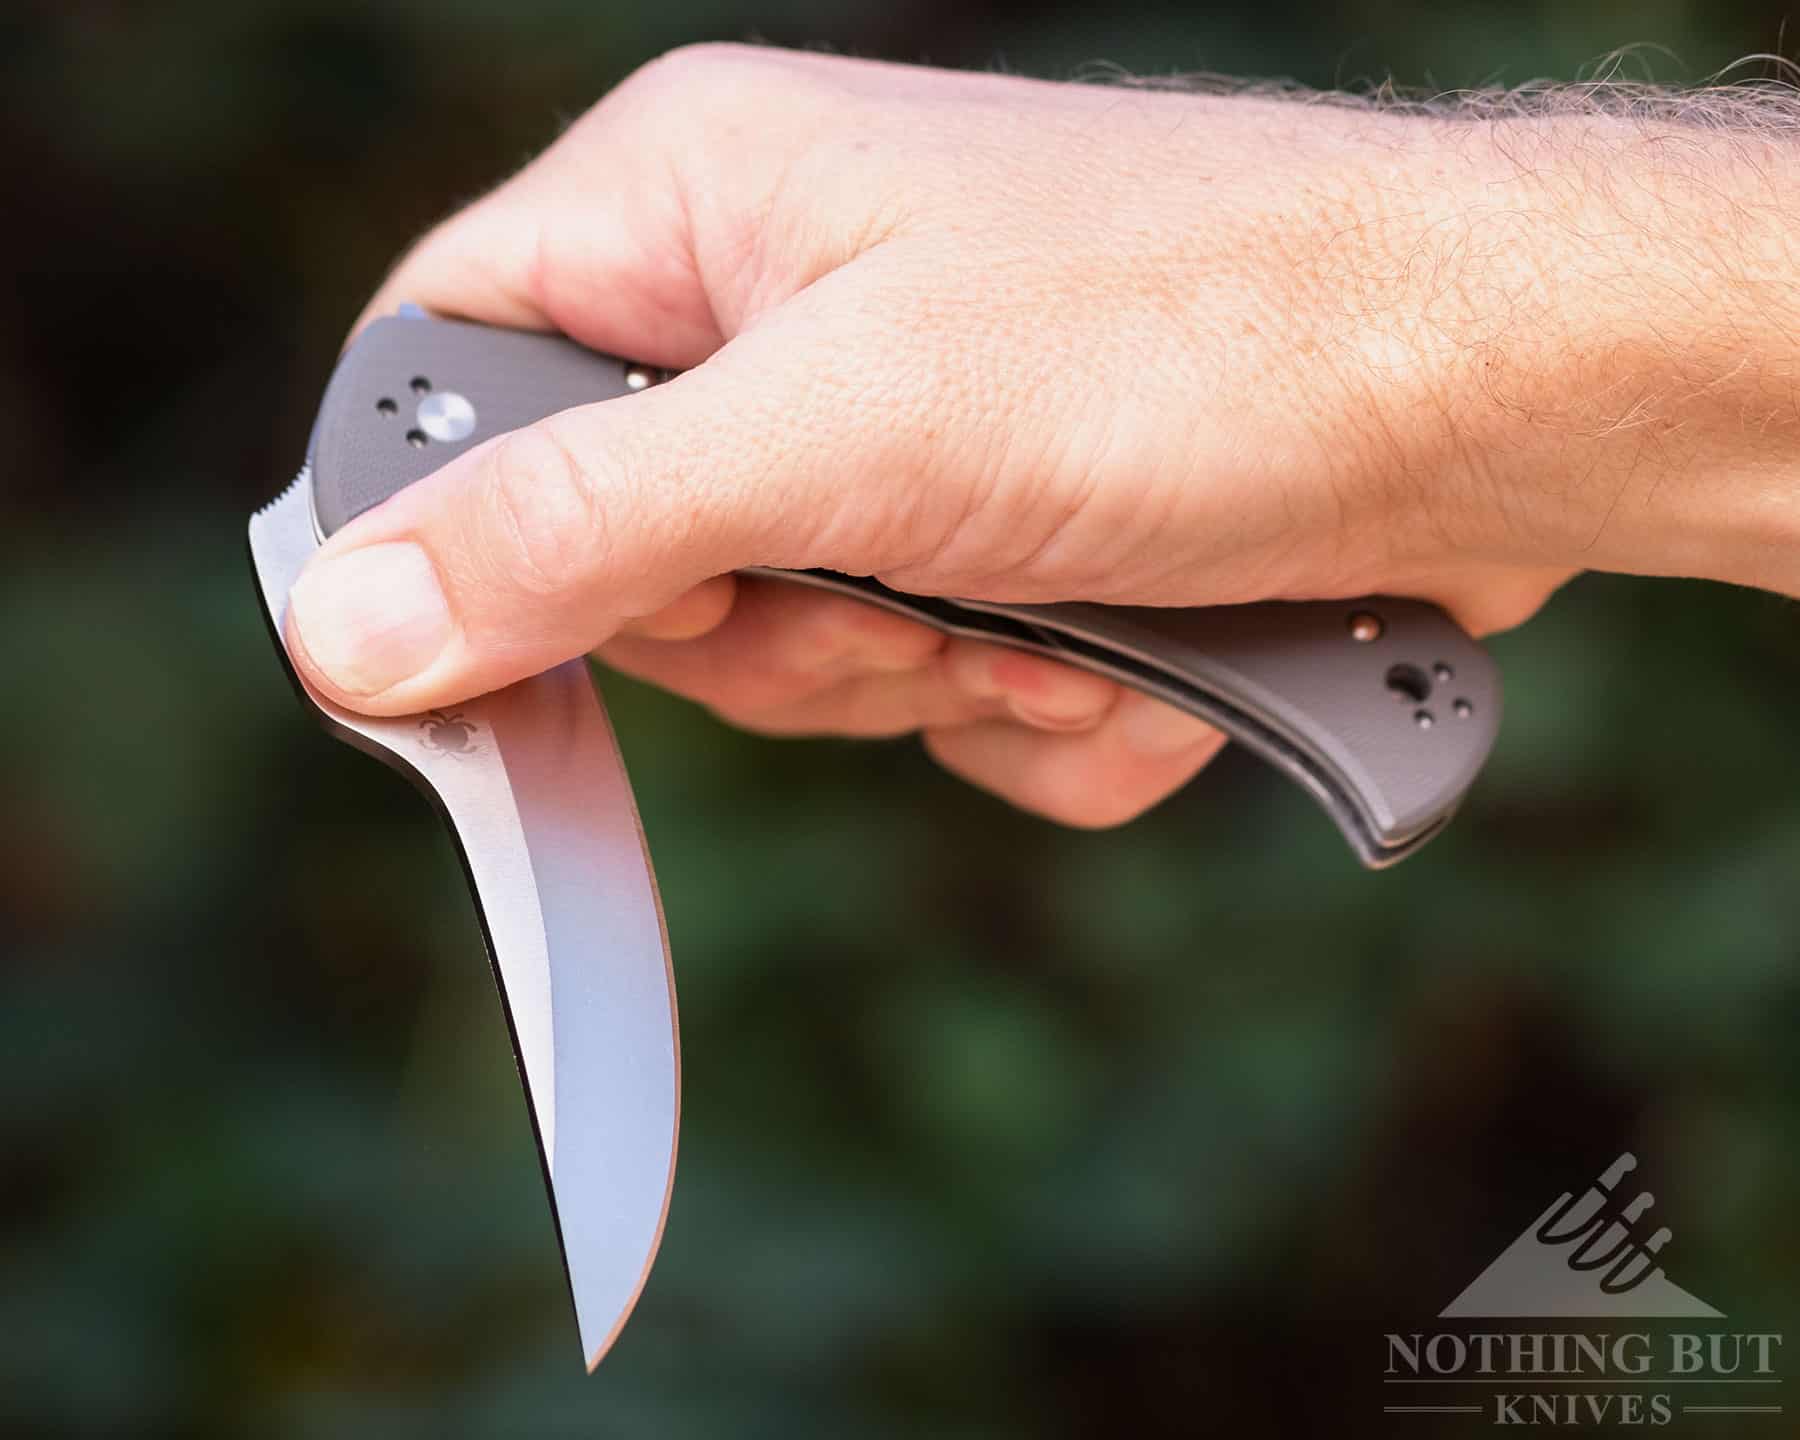 Spyderco's thumb-hole is such a simple idea, and provides the extra leverage needed to rock open this lock-blade.